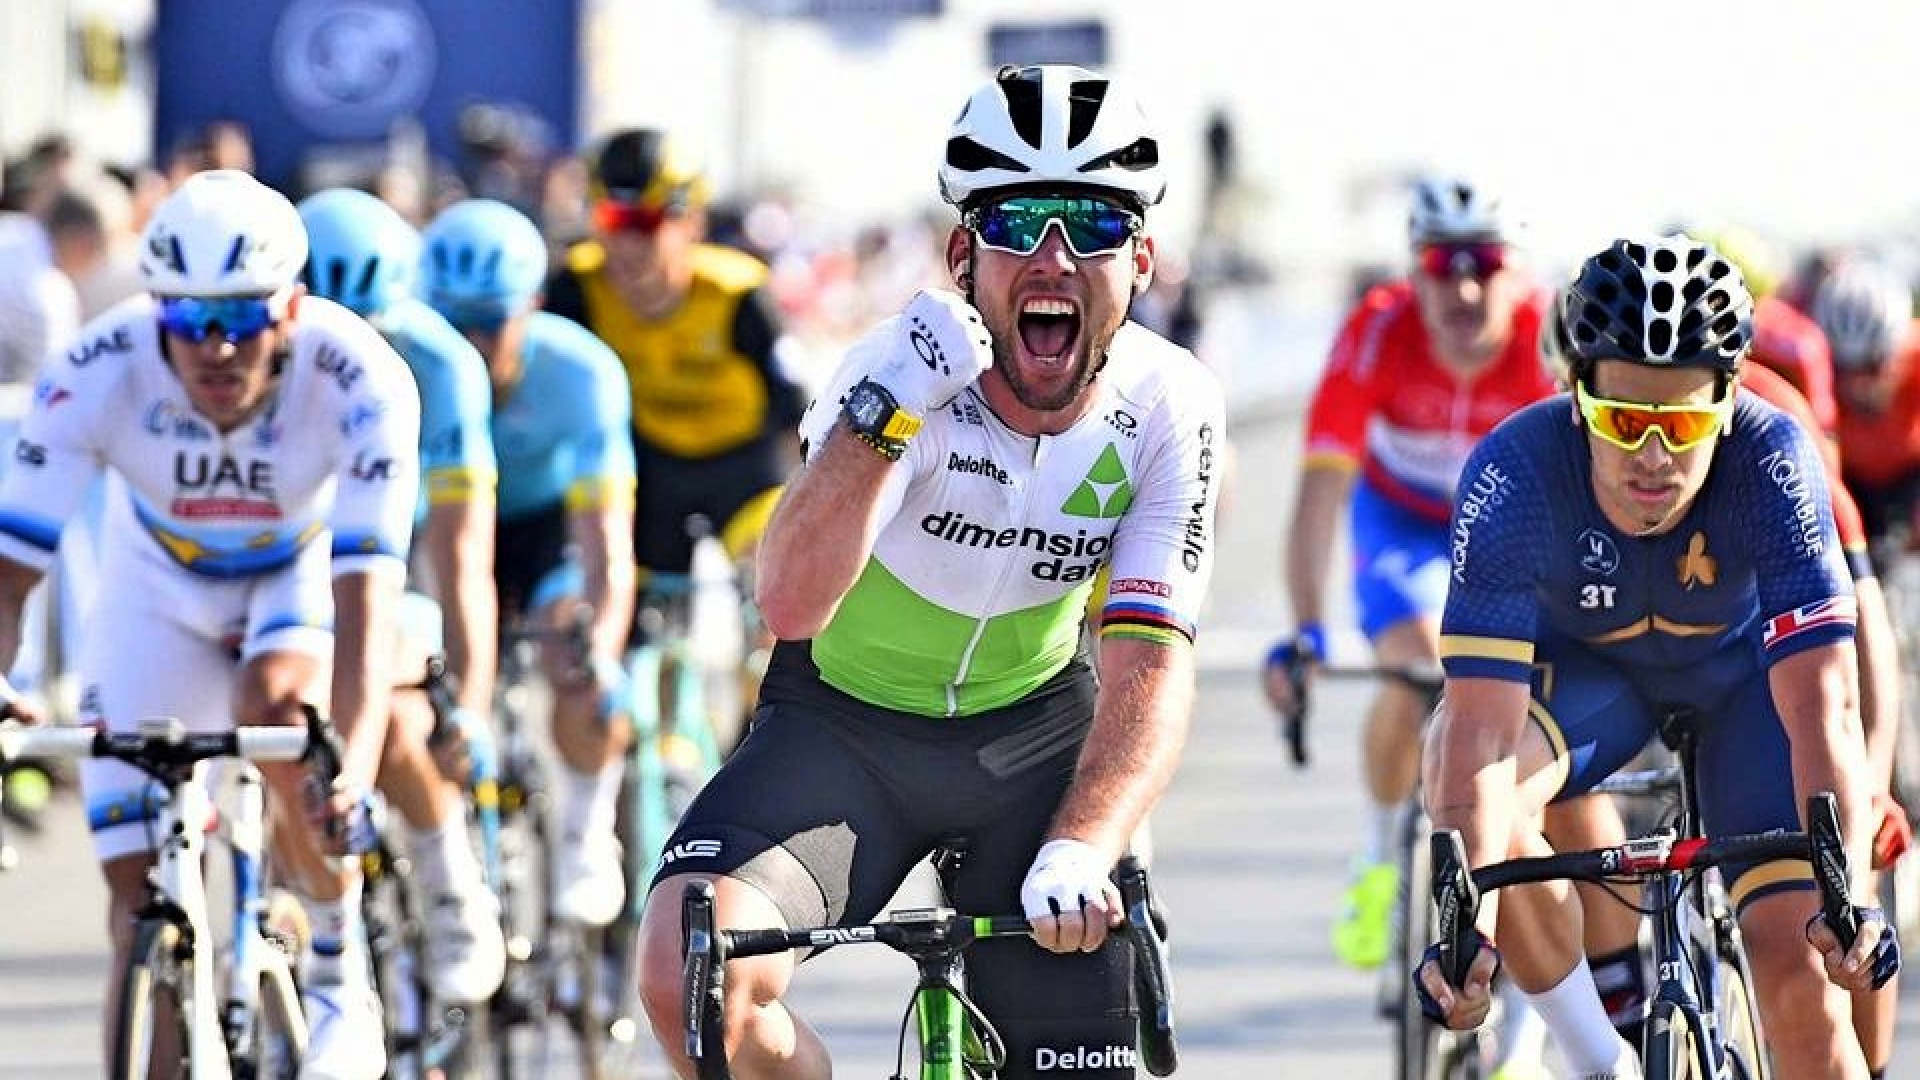 Ride the fury road, the Mark Cavendish's story